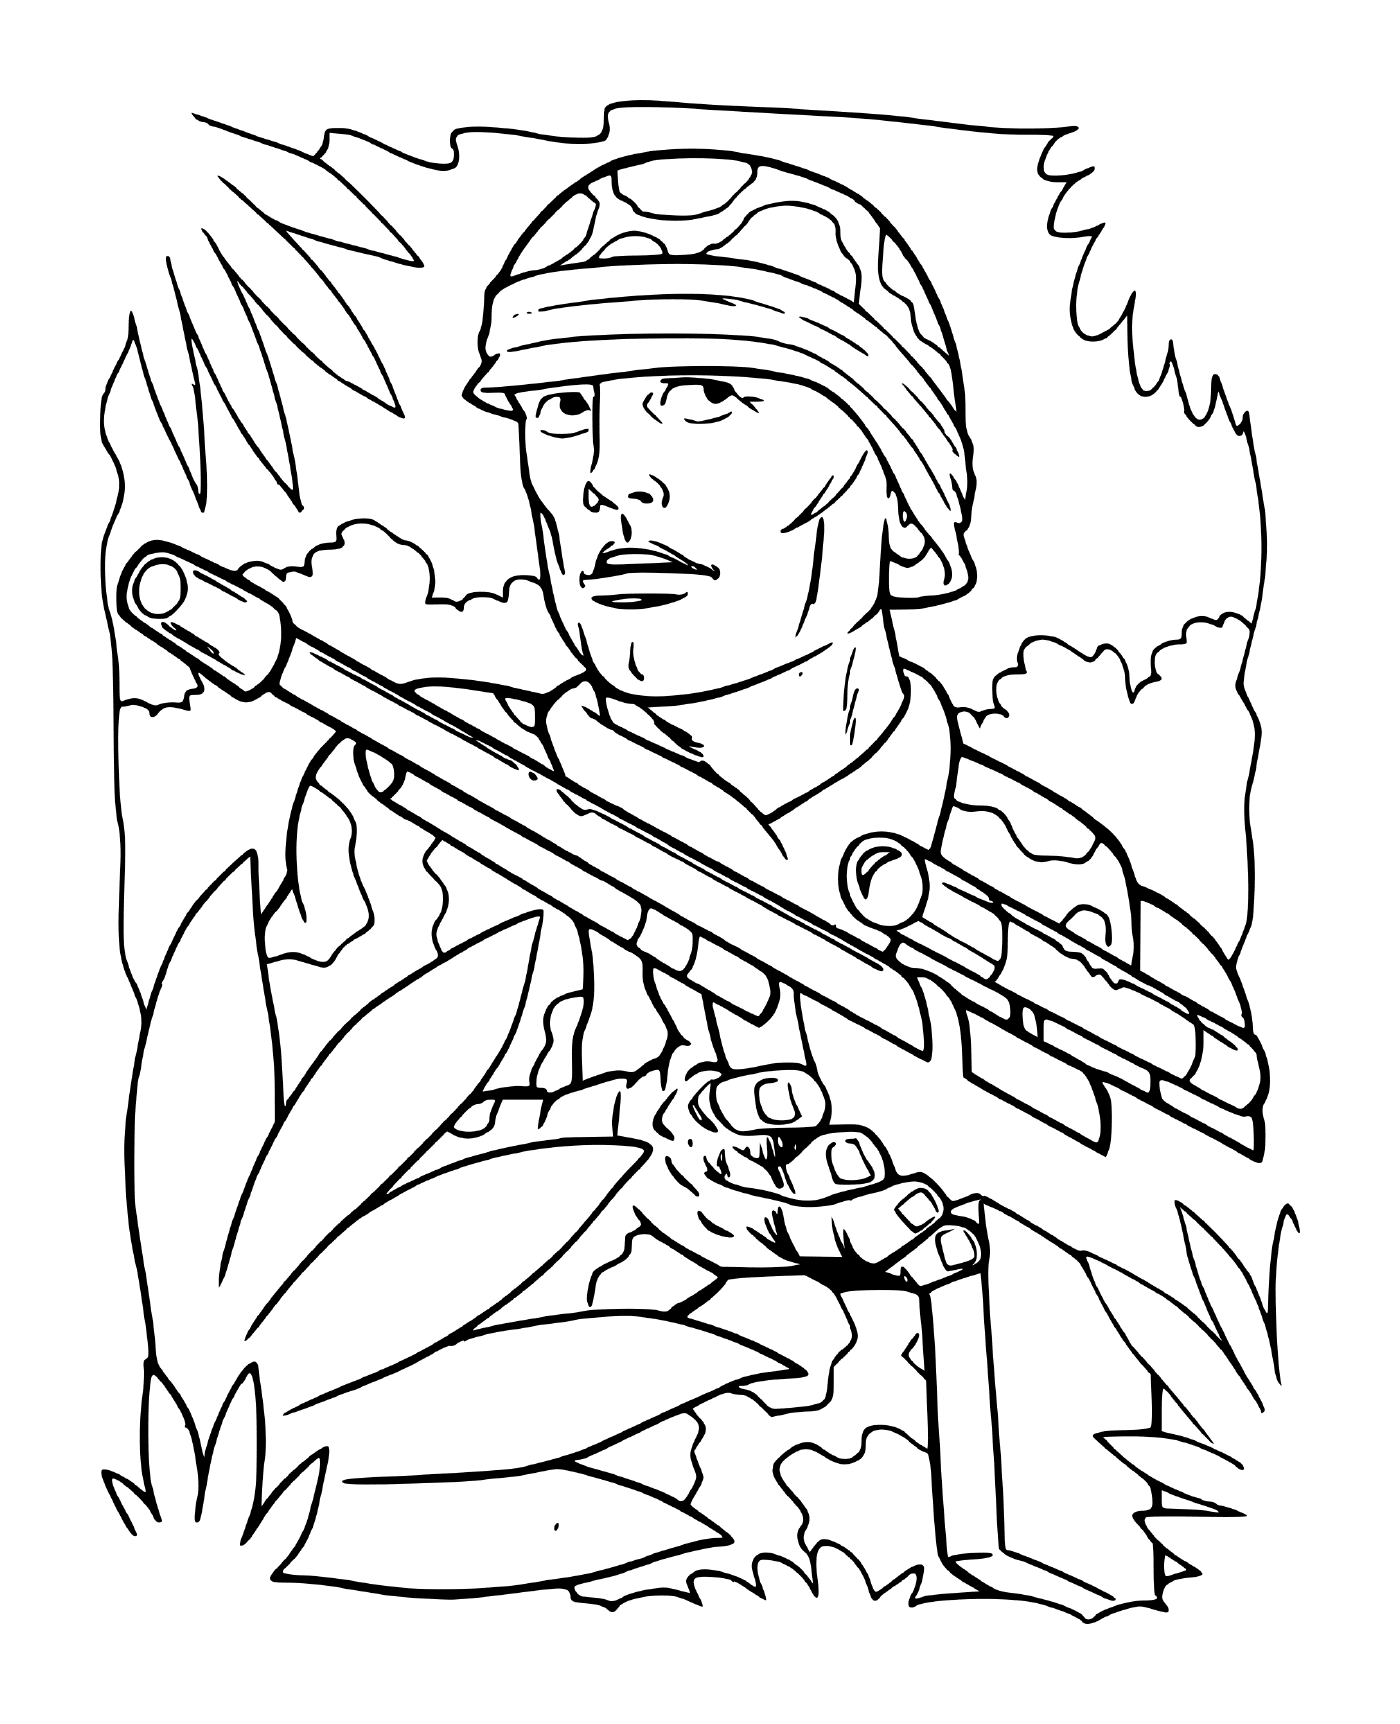  Soldier of war in the forest: a soldier holding a rifle in a forest 